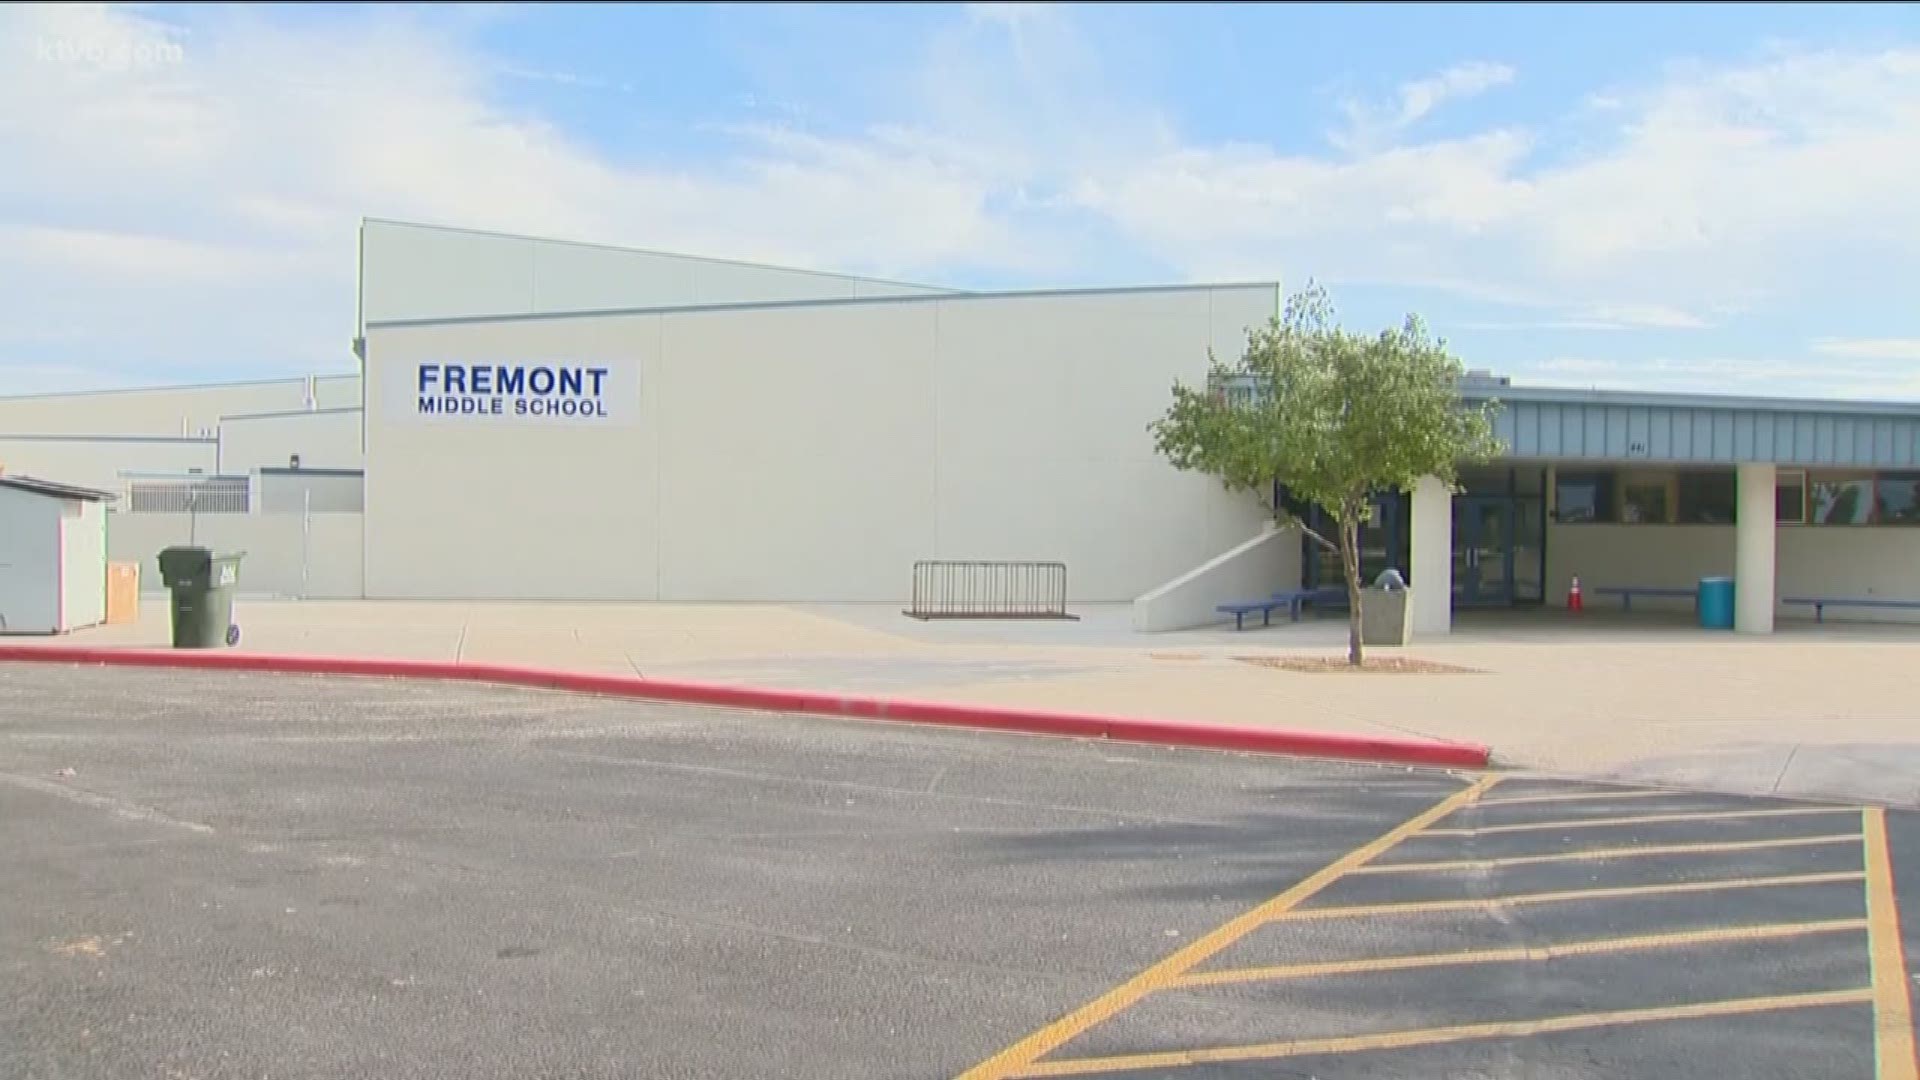 Fremont Middle School was converted from an elementary school to accommodate a sharp uptick in population growth.